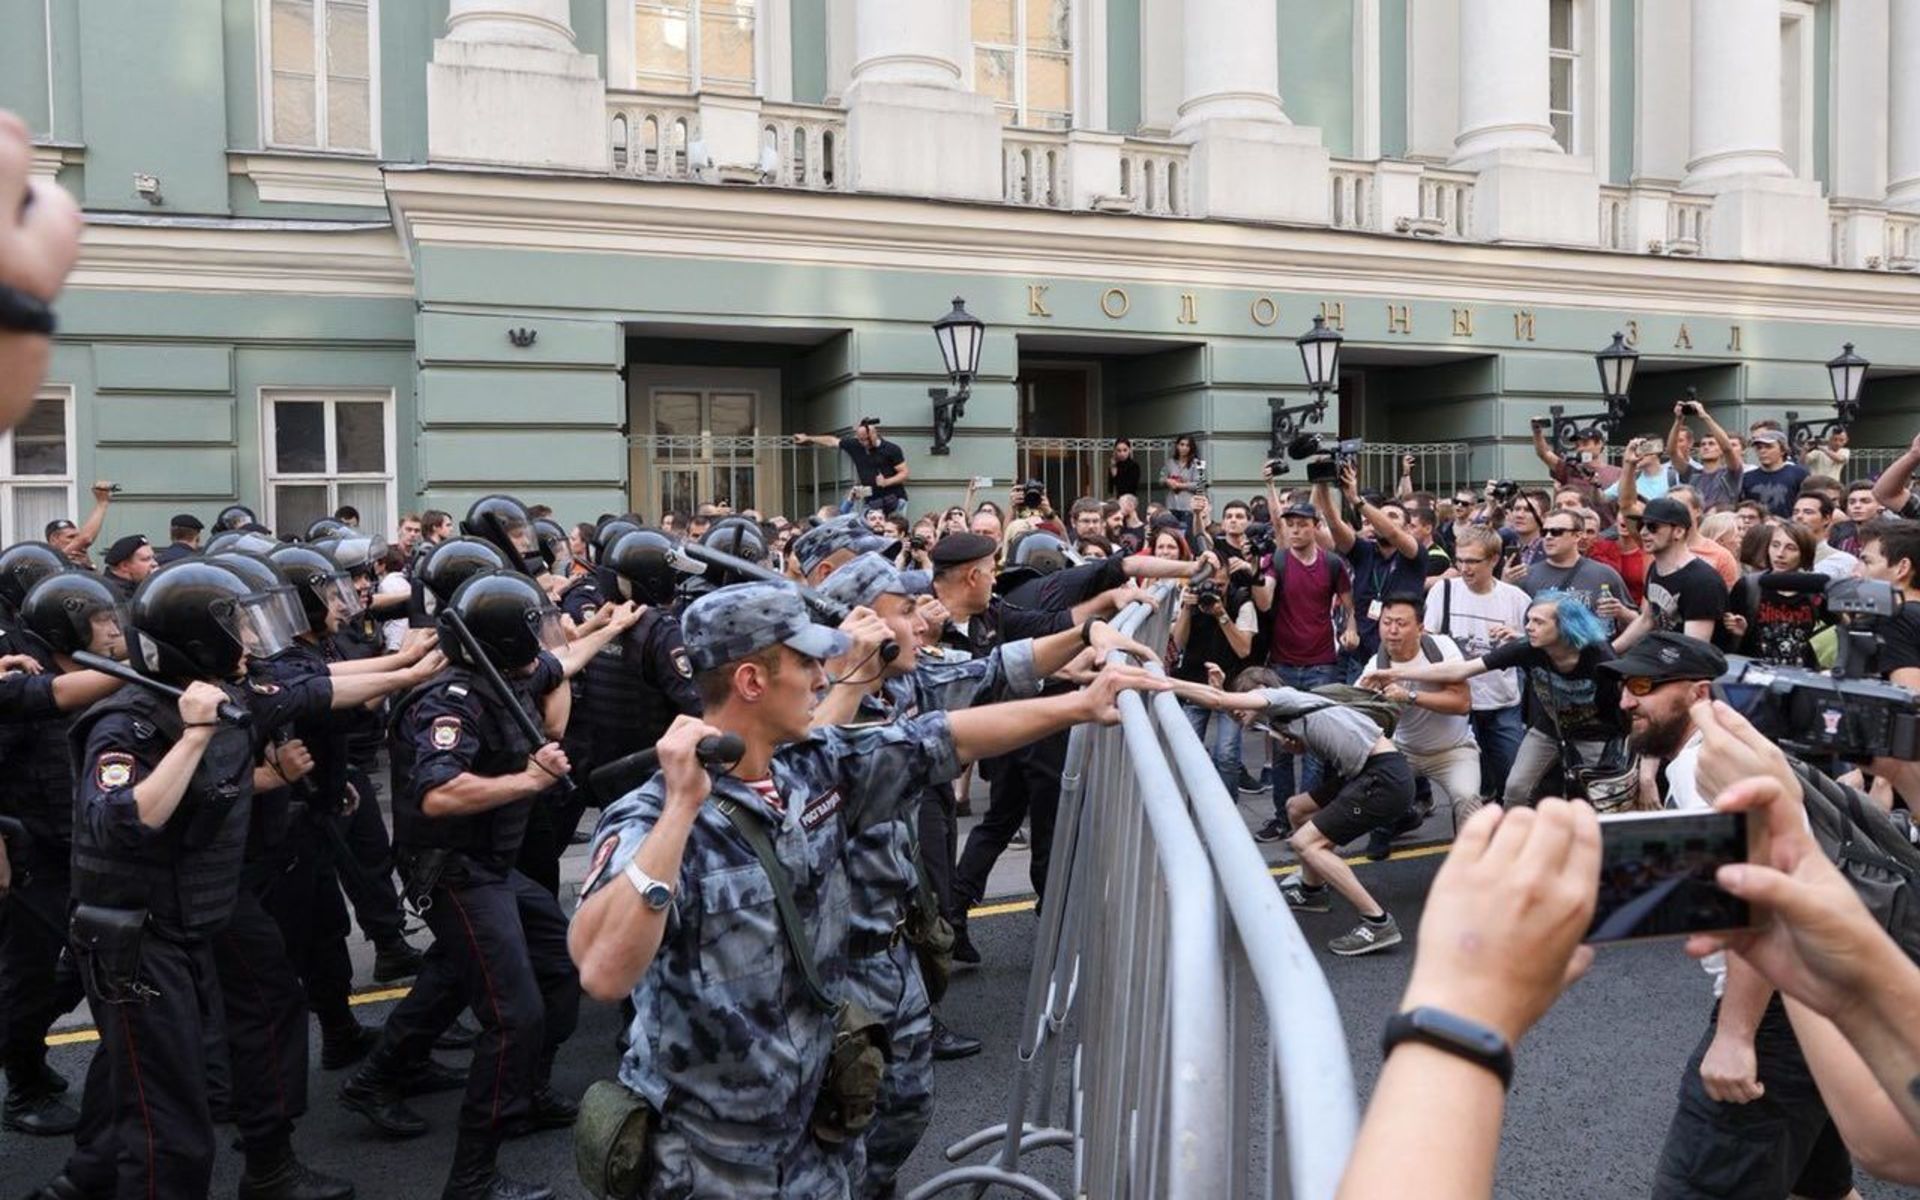 Street protests in Moscow against increases in pension ages by Putin government, September 9, 2018 (Image: novayagazeta.ru)